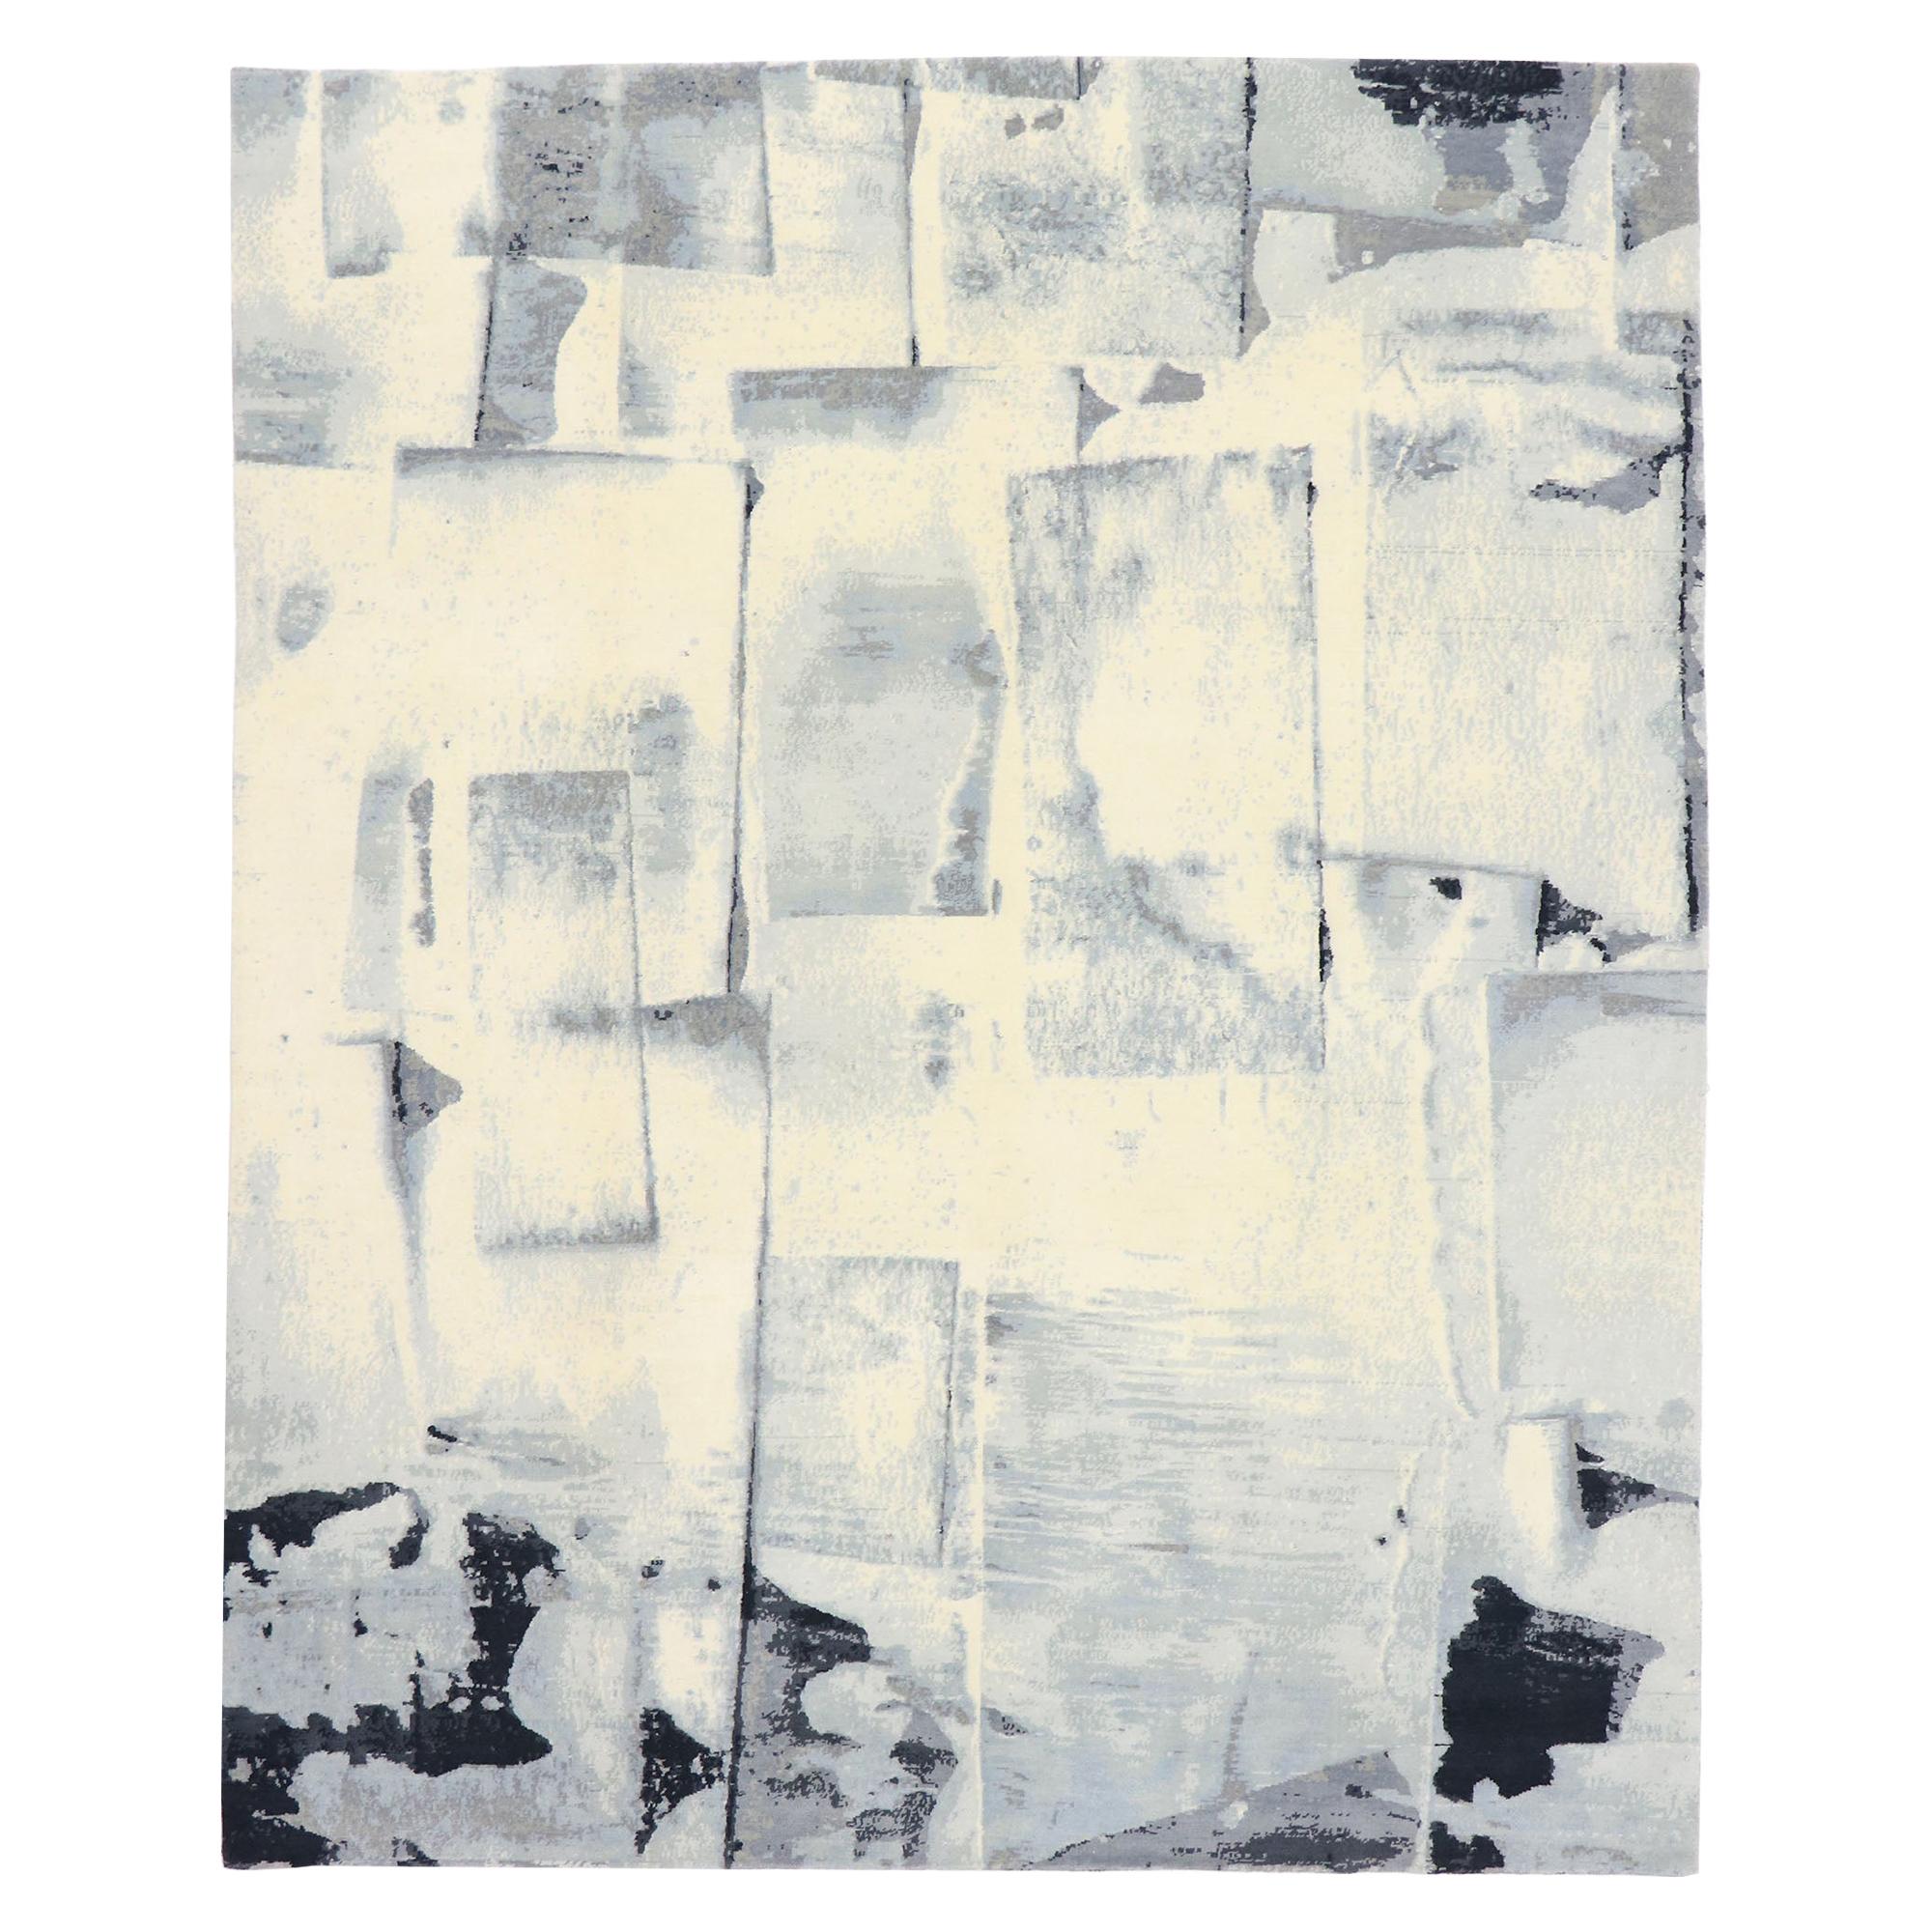 New Monochrome Contemporary Abstract Rug with Modern Expressionist Style